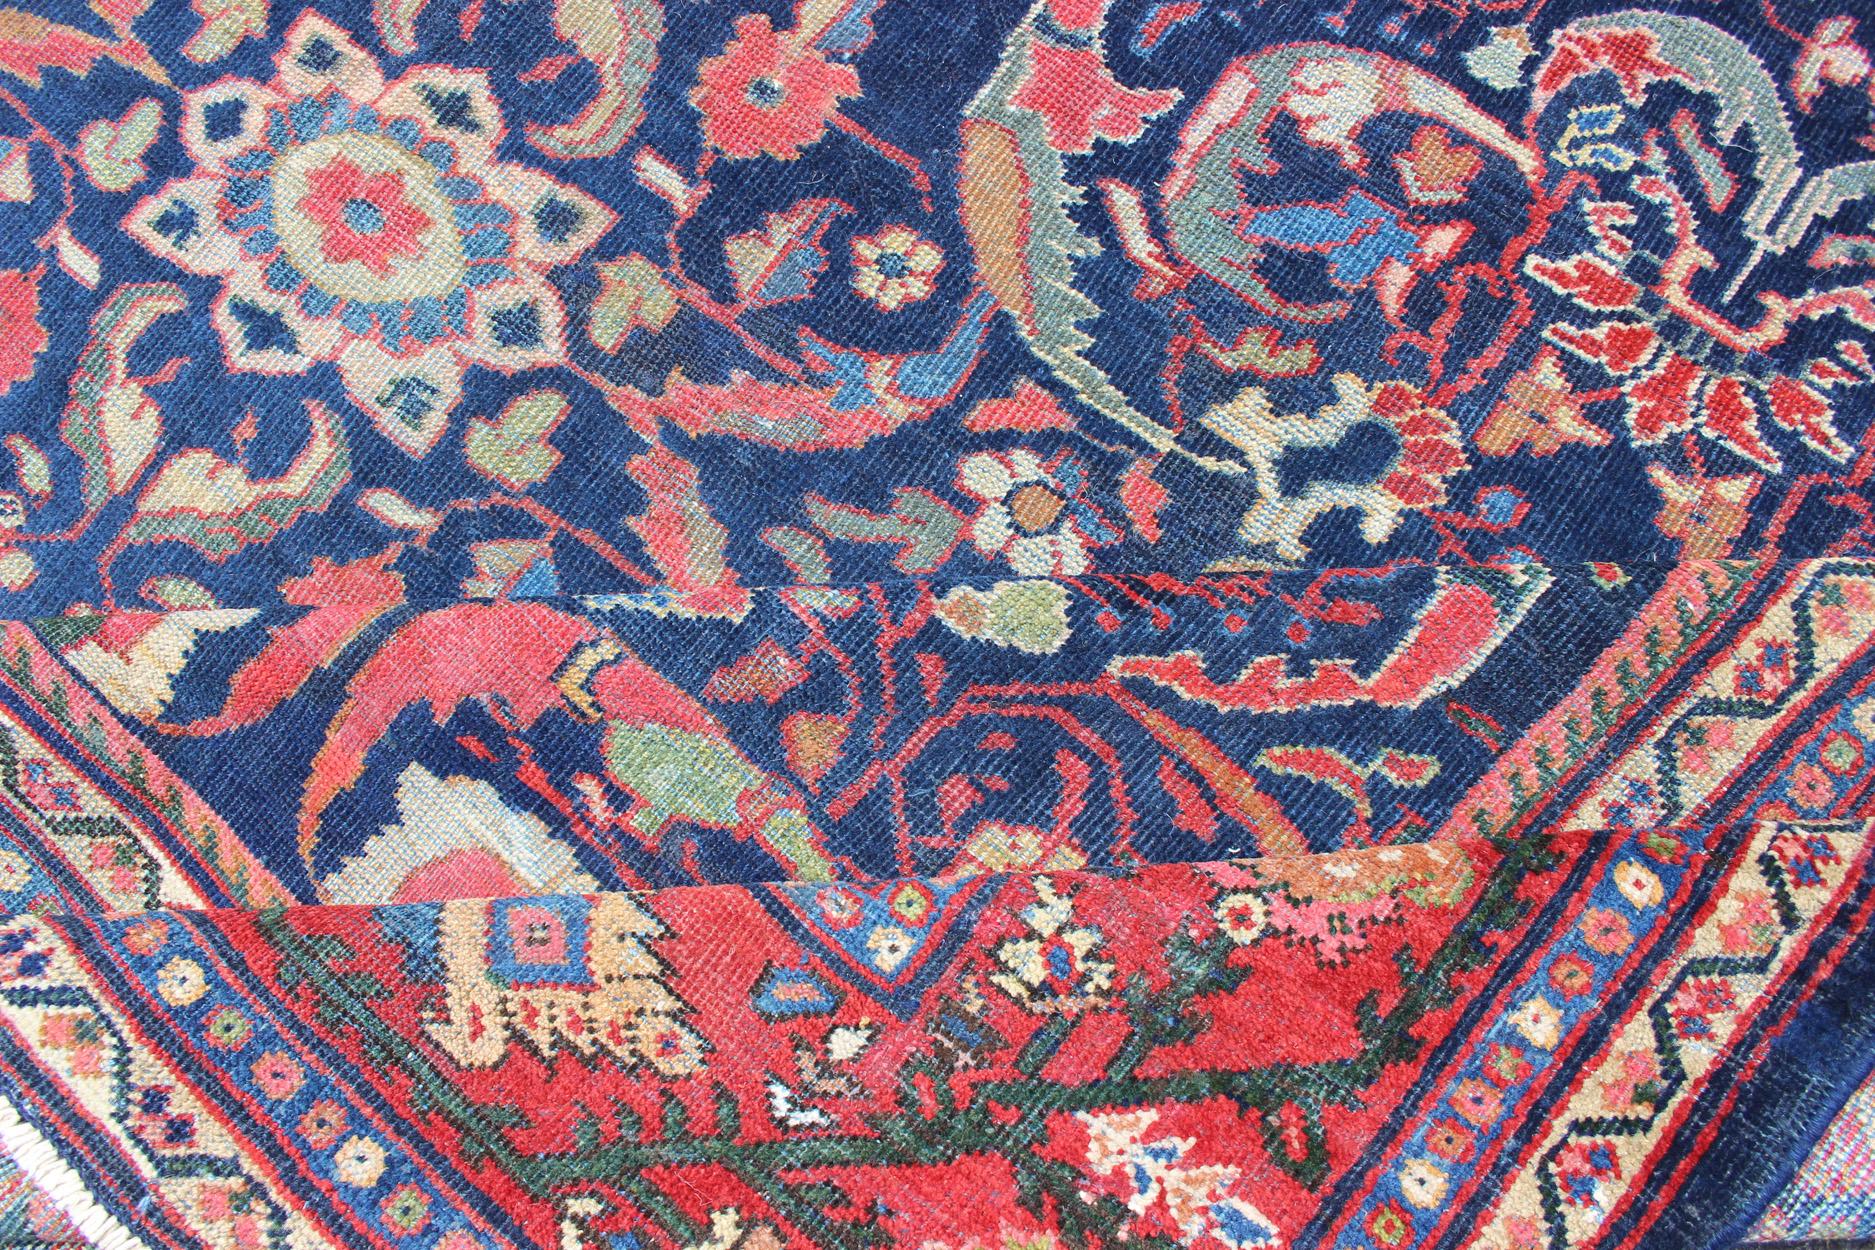 Colorful Antique Persian Sultanabad Rug with Navy Blue Field and Red Border For Sale 6